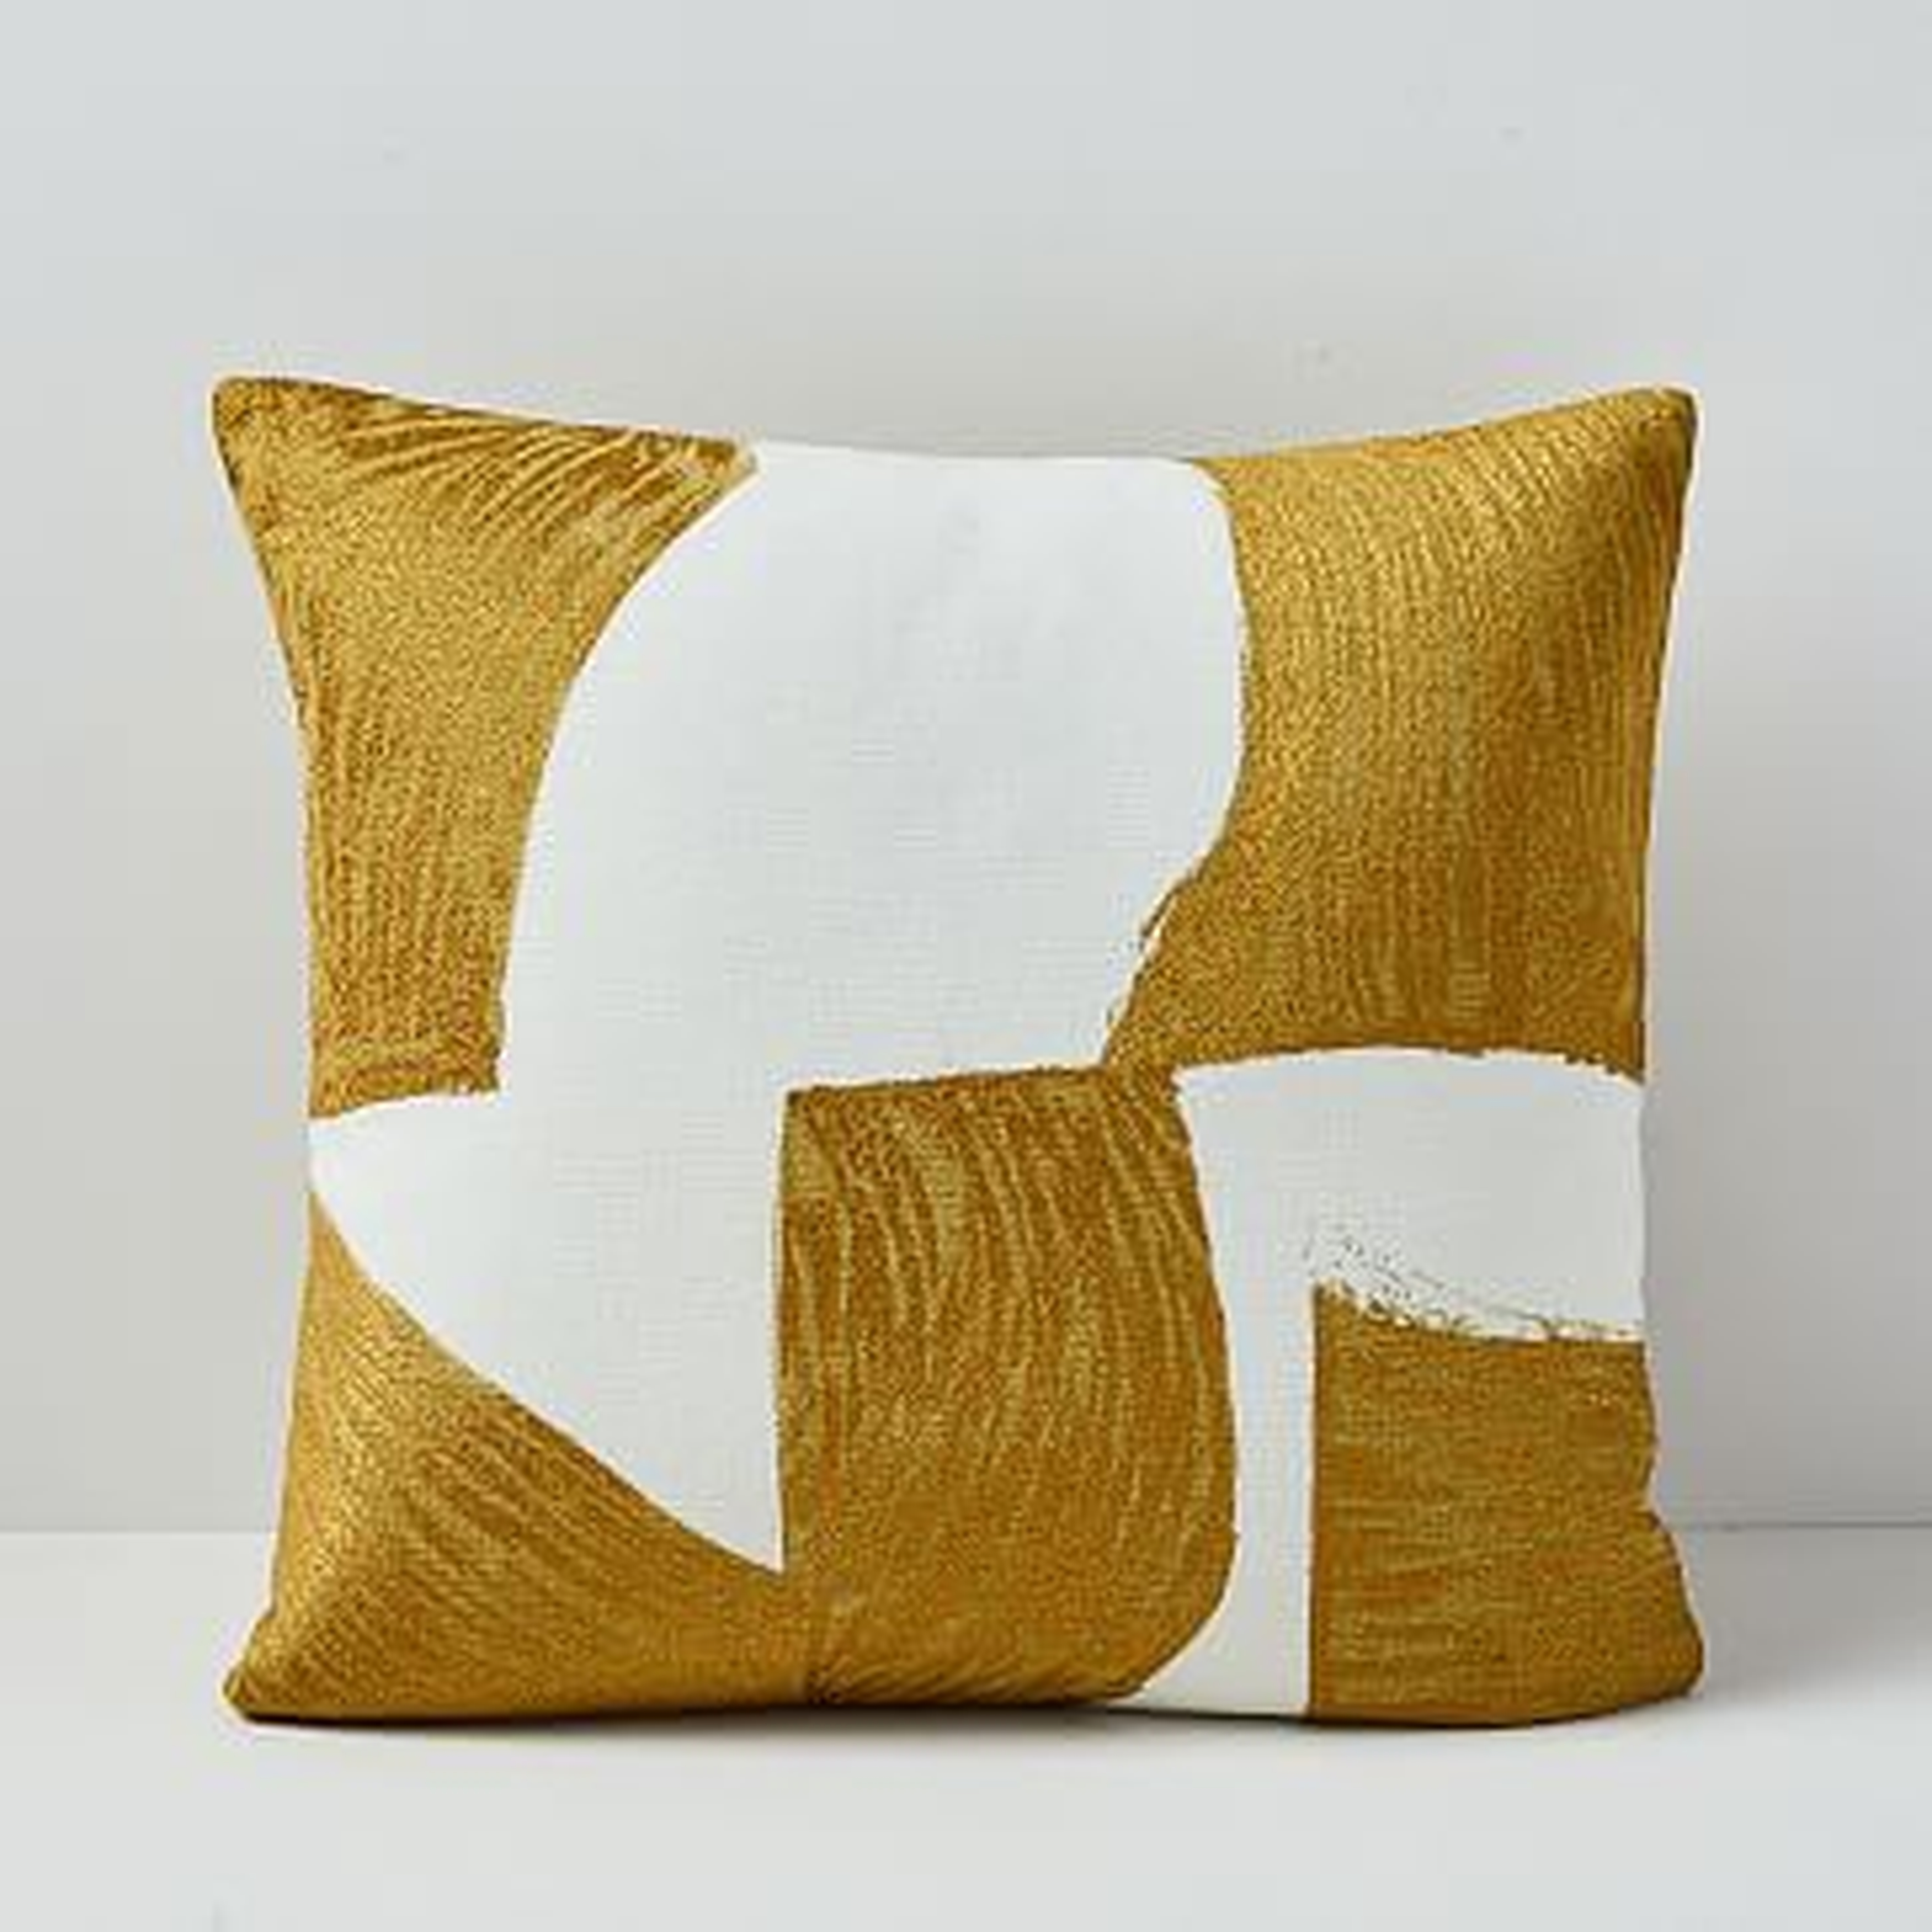 Embroidered Geo Pillow Cover, 20"x20" - West Elm